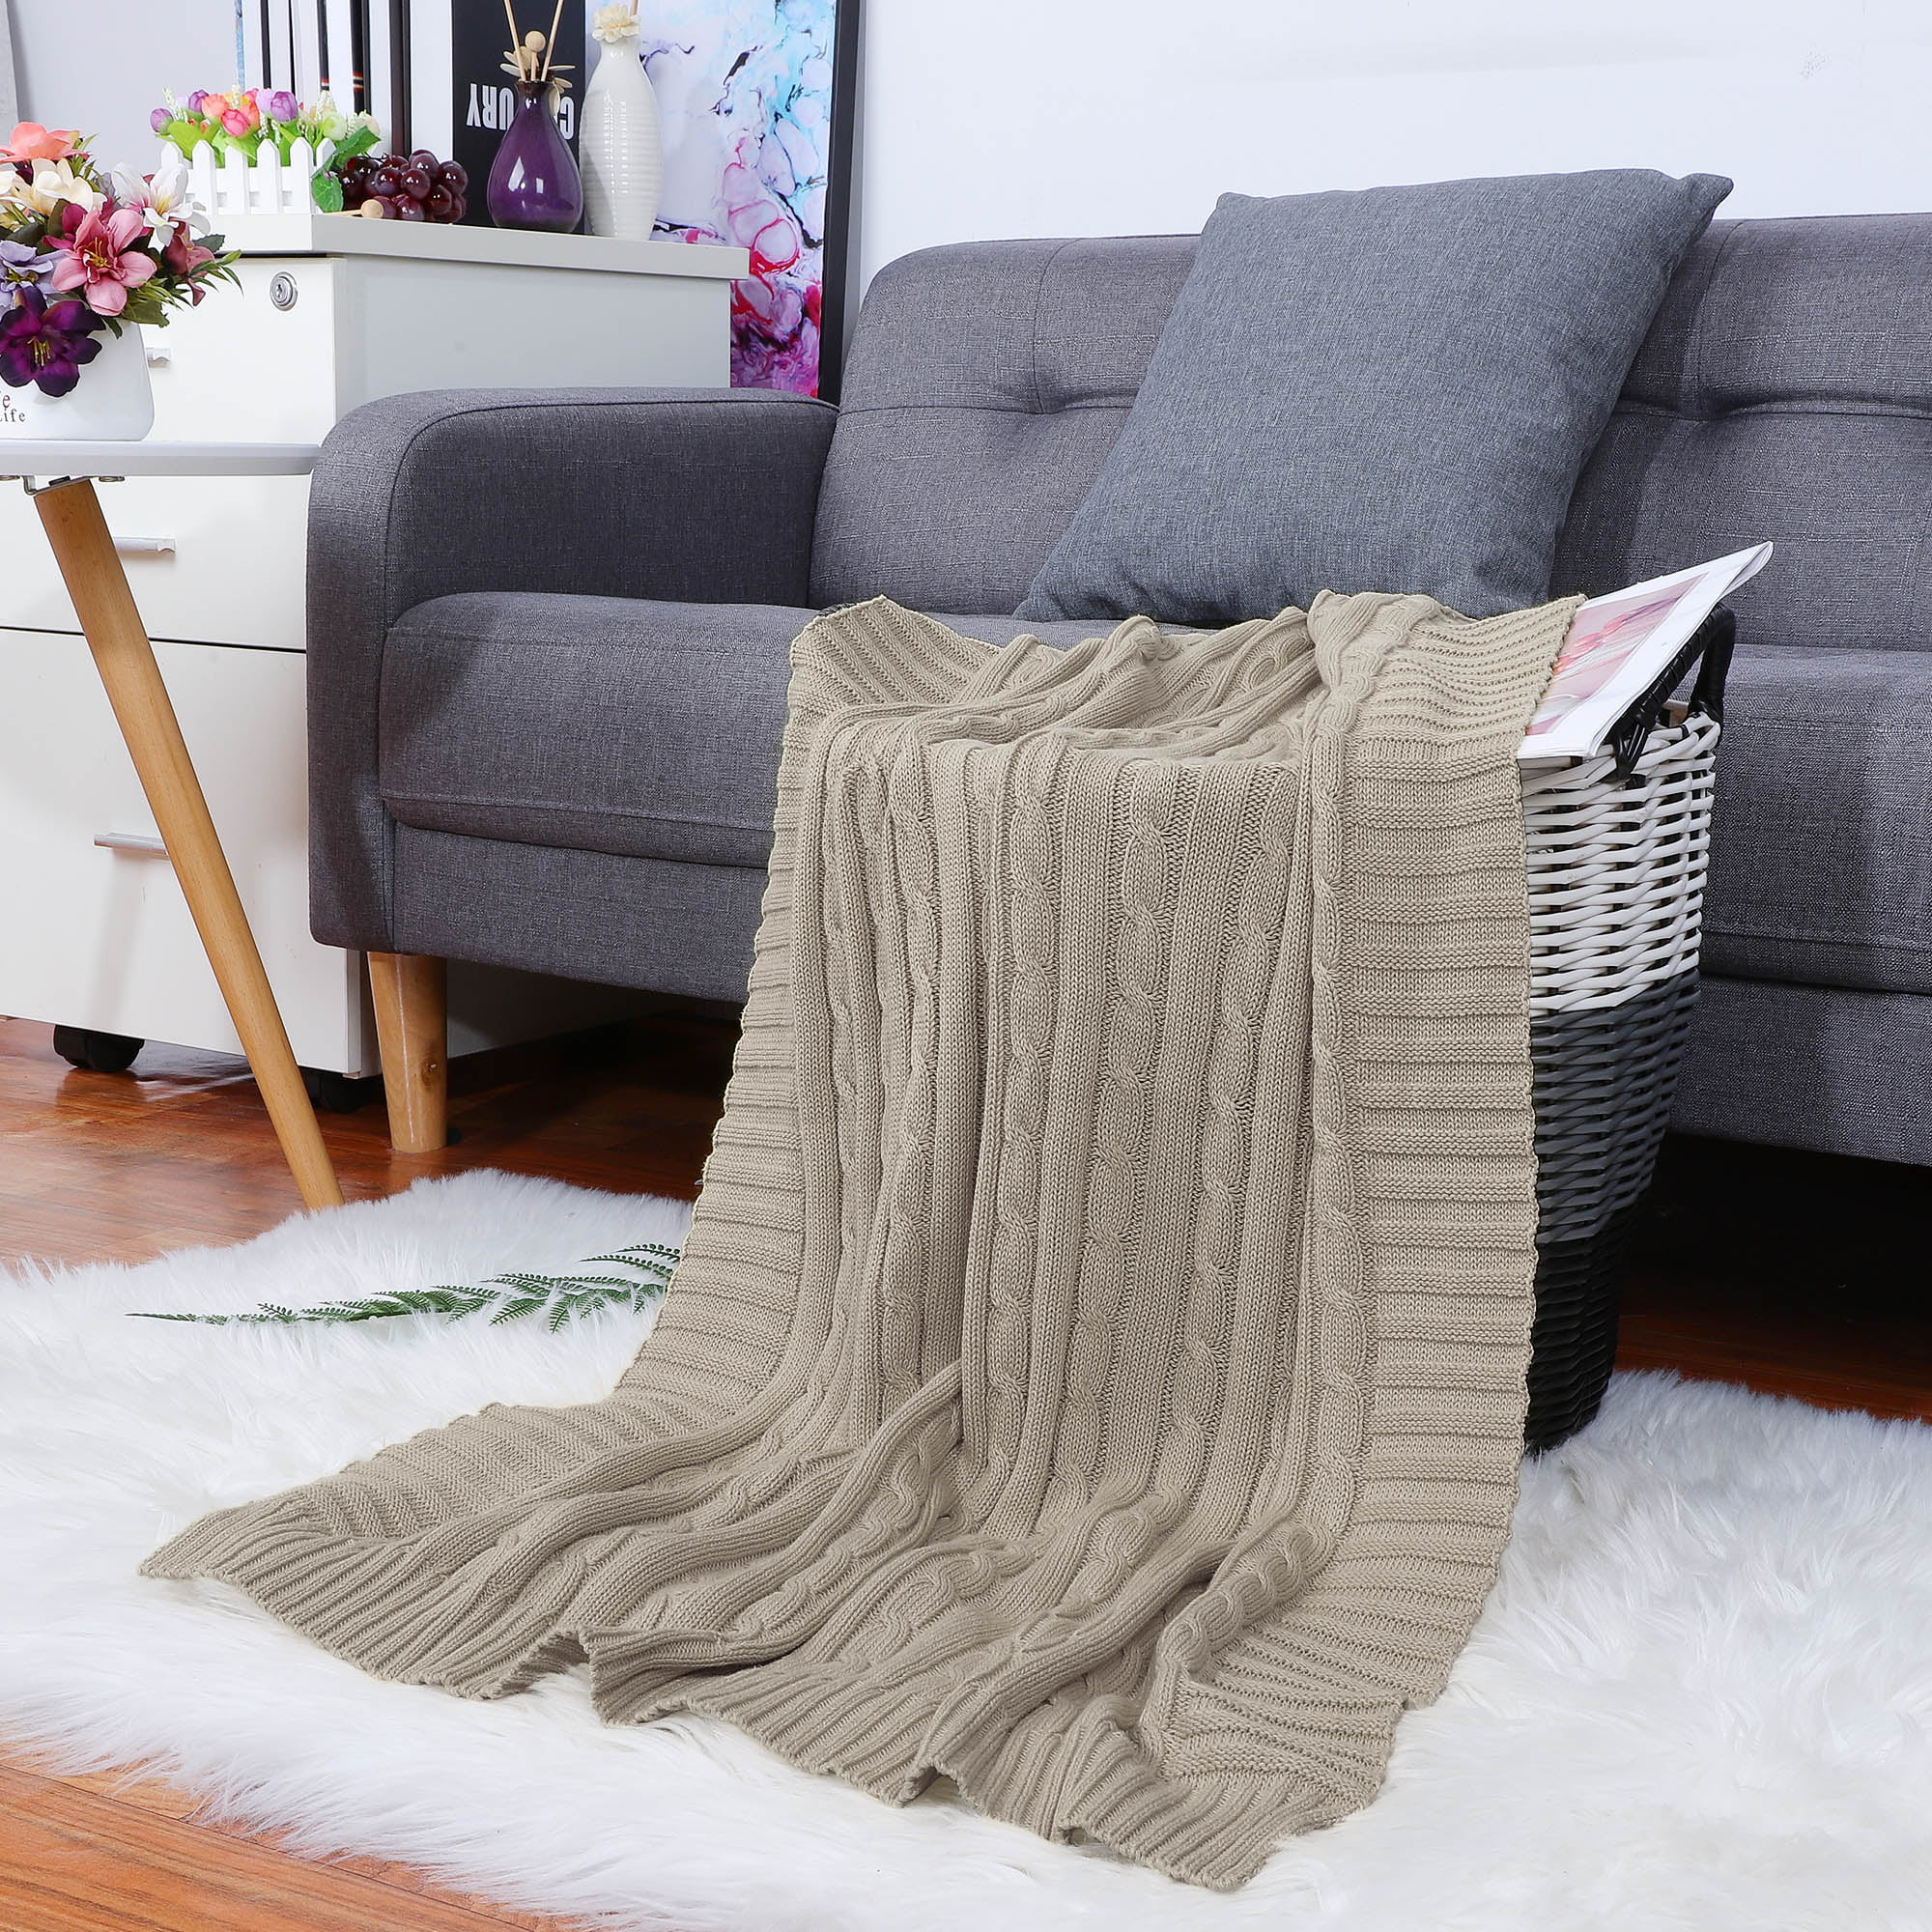 Knitted Throw Blanket for Sofa Couch Soft 100 Cotton